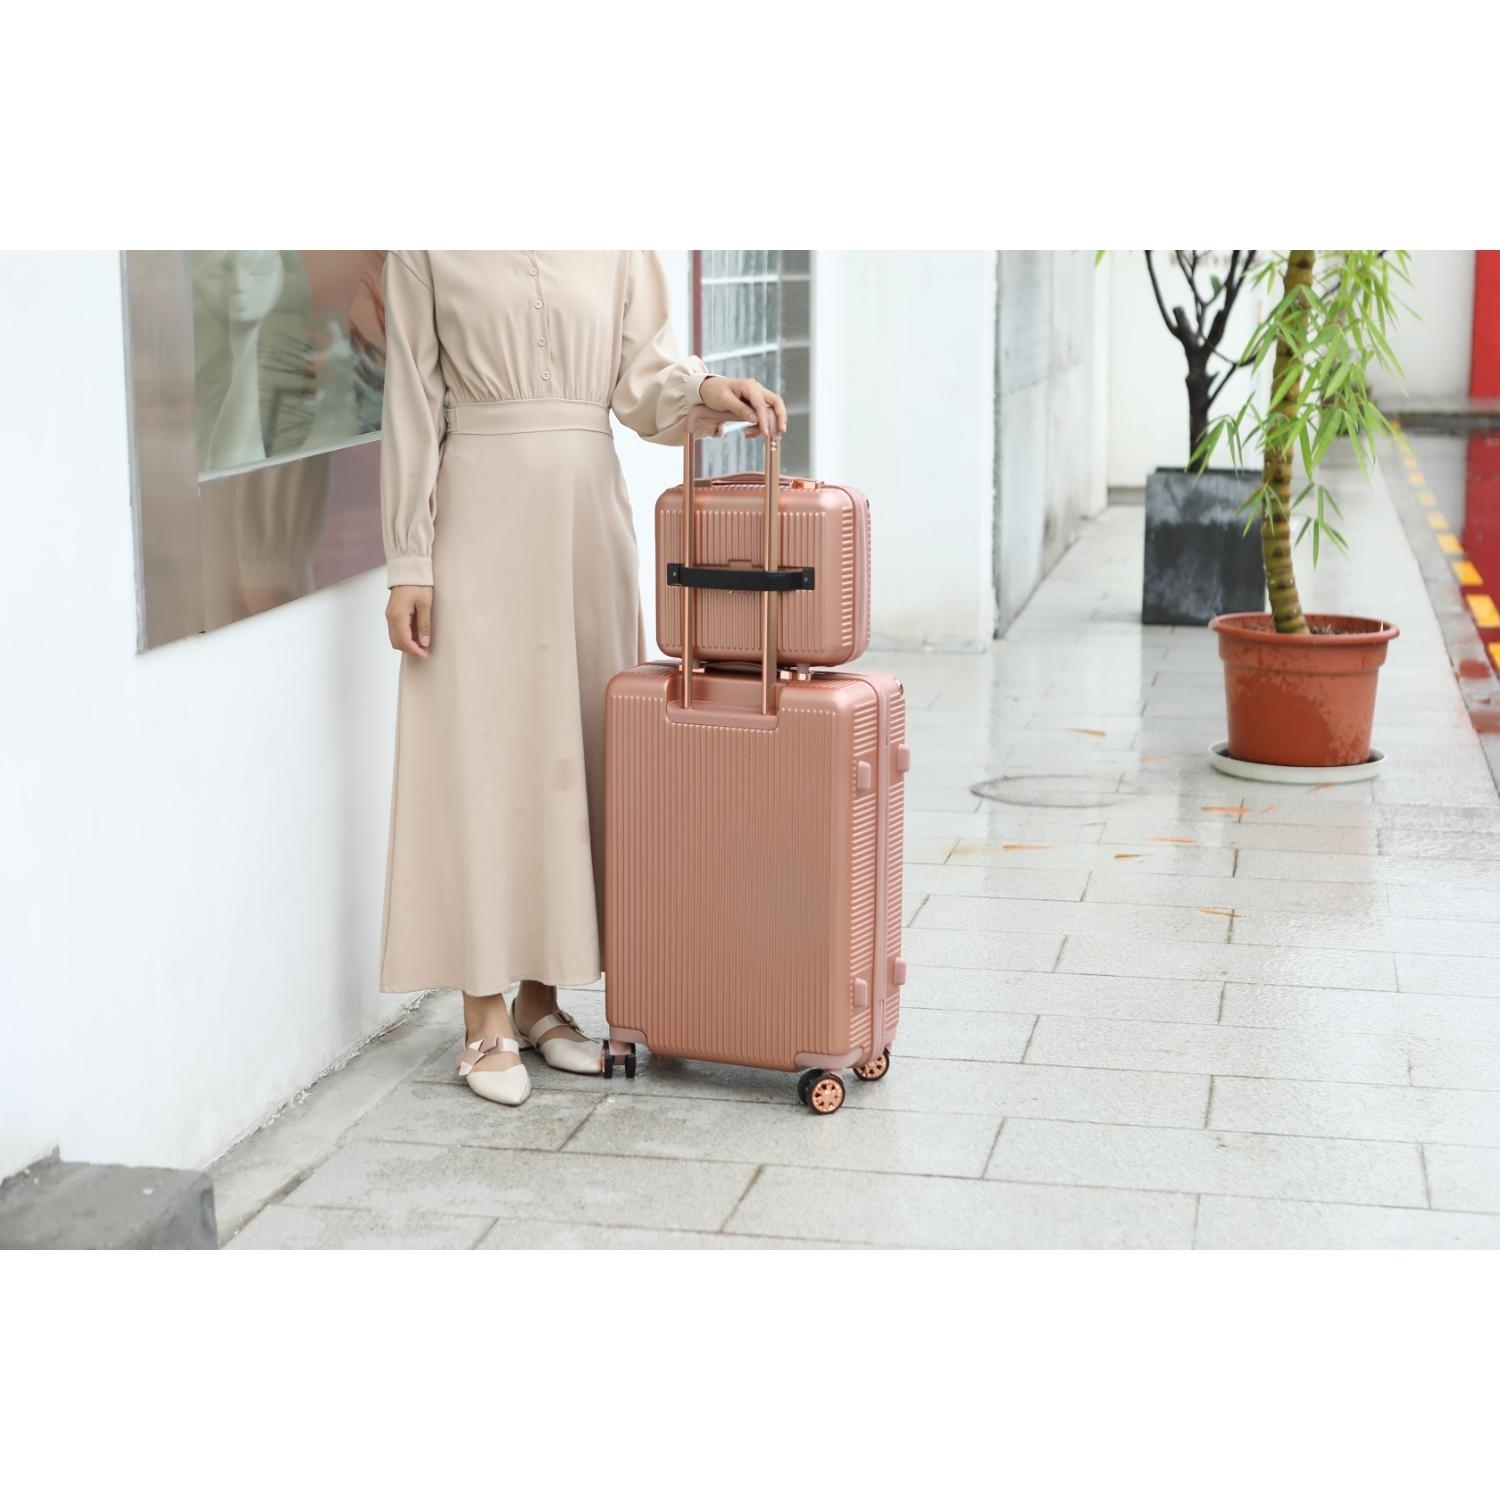 MKF Collection Tulum 2 Piece Luggage Set With Spinner Wheels And Expandable Handles By Mia K. - Rose Gold